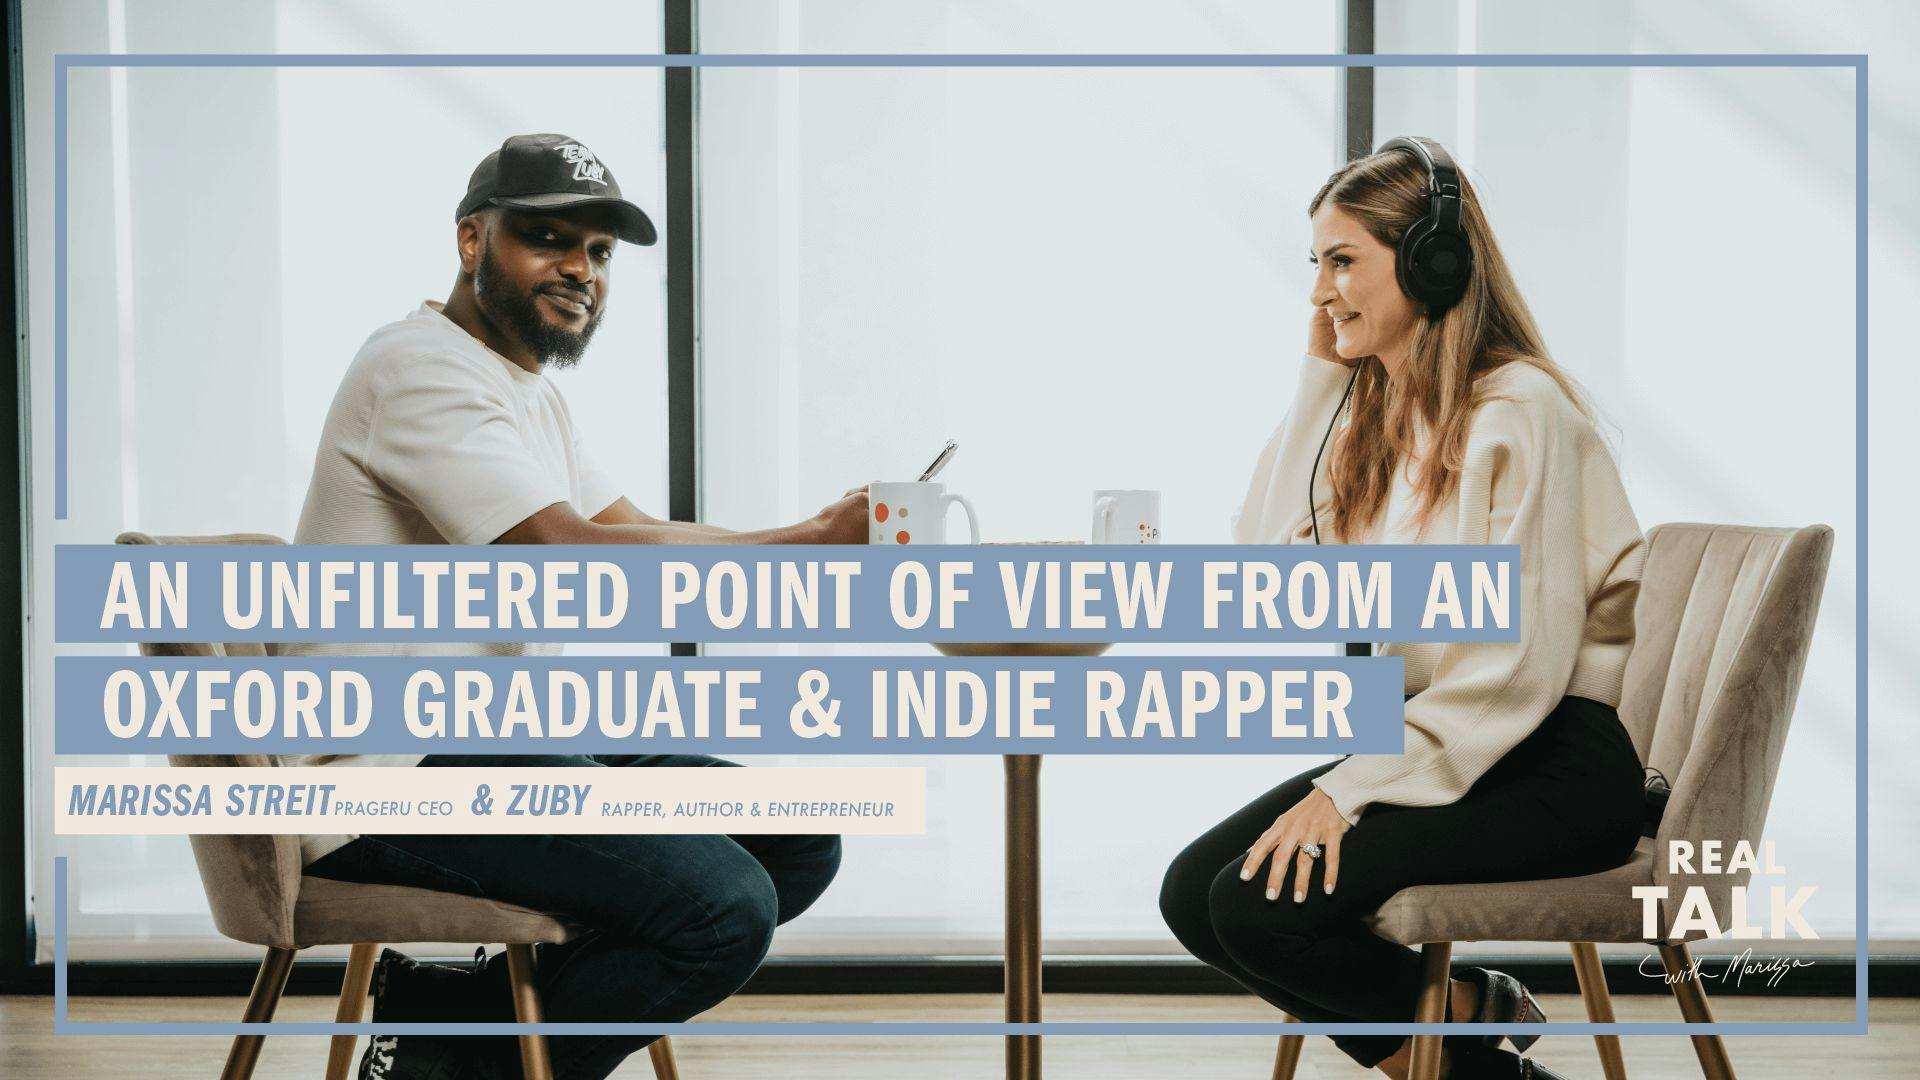 An Unfiltered Point of View from an Oxford Graduate & Indie Rapper